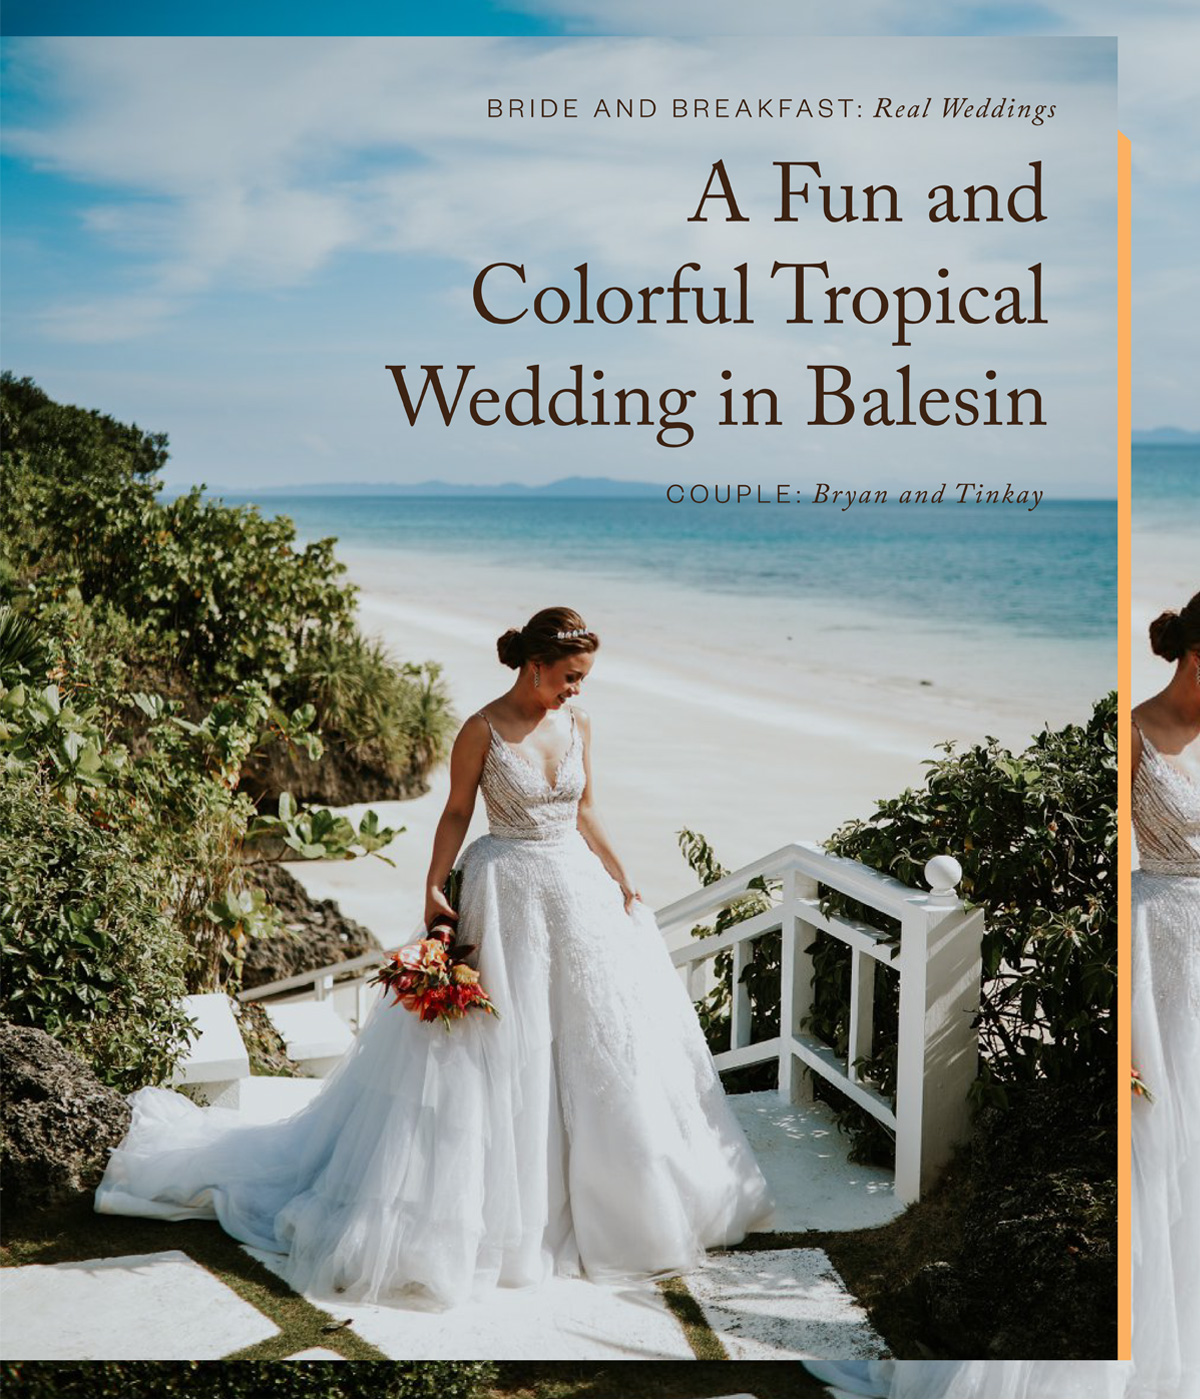 A Fun and Colorful Tropical Wedding in Balesin